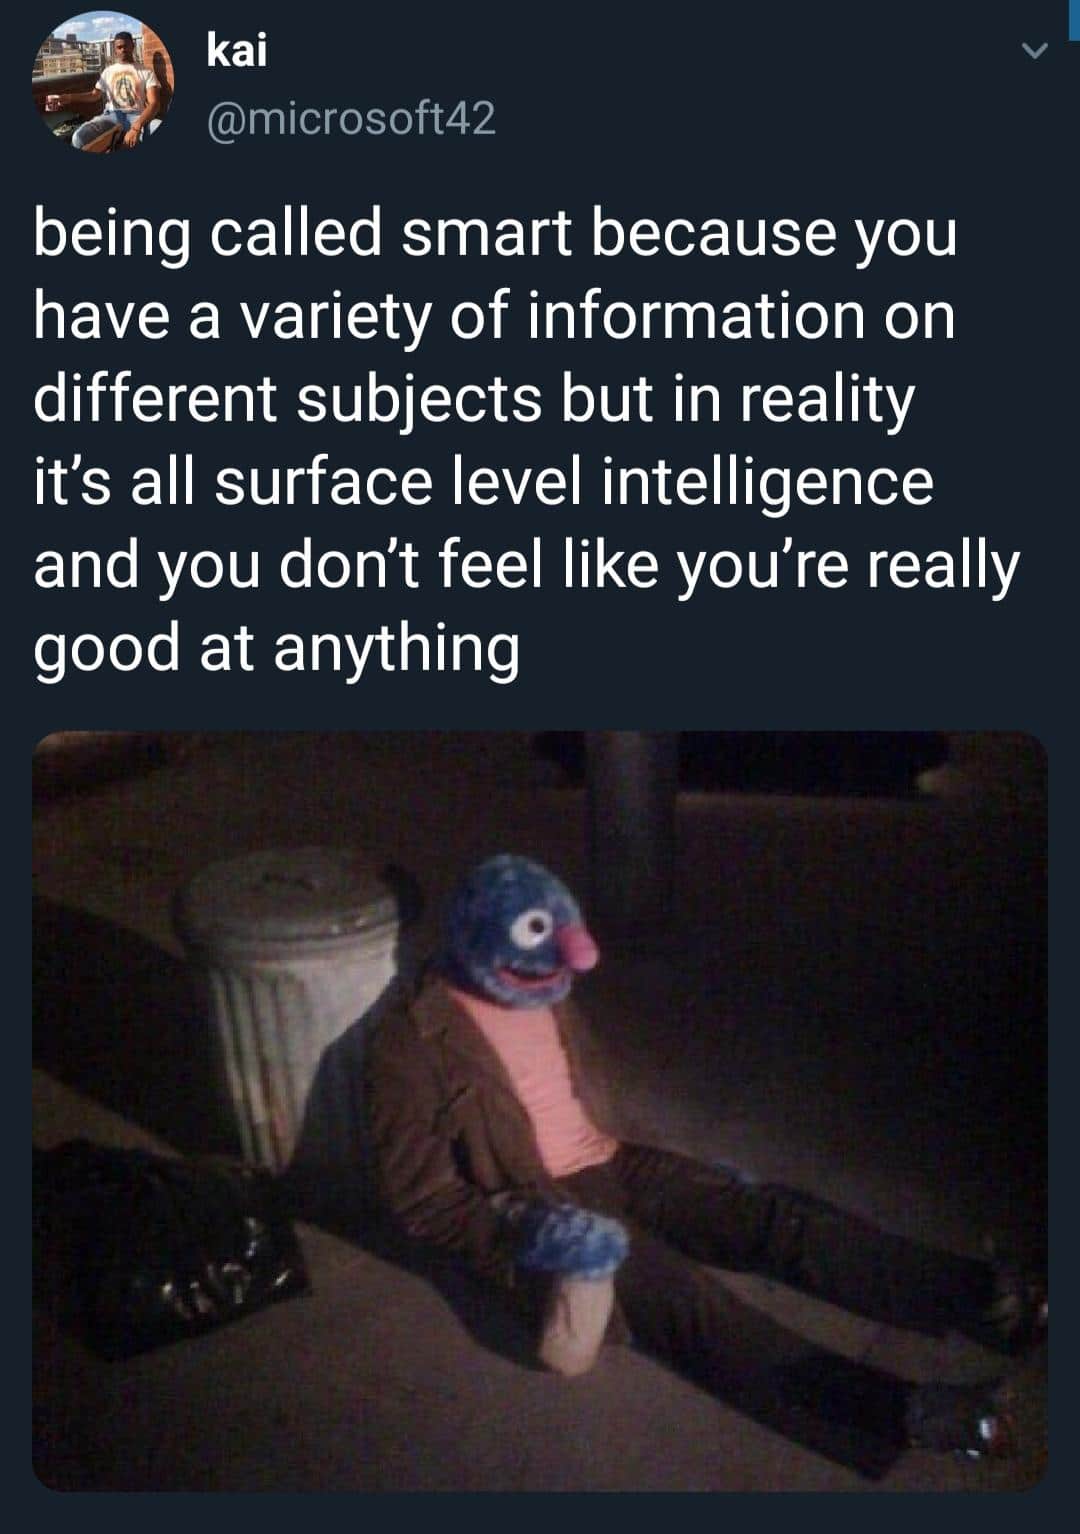 depression depression-memes depression text: kai @microsoft42 being called smart because you have a variety of information on different subjects but in reality it's all surface level intelligence and you don't feel like you're really good at anything 